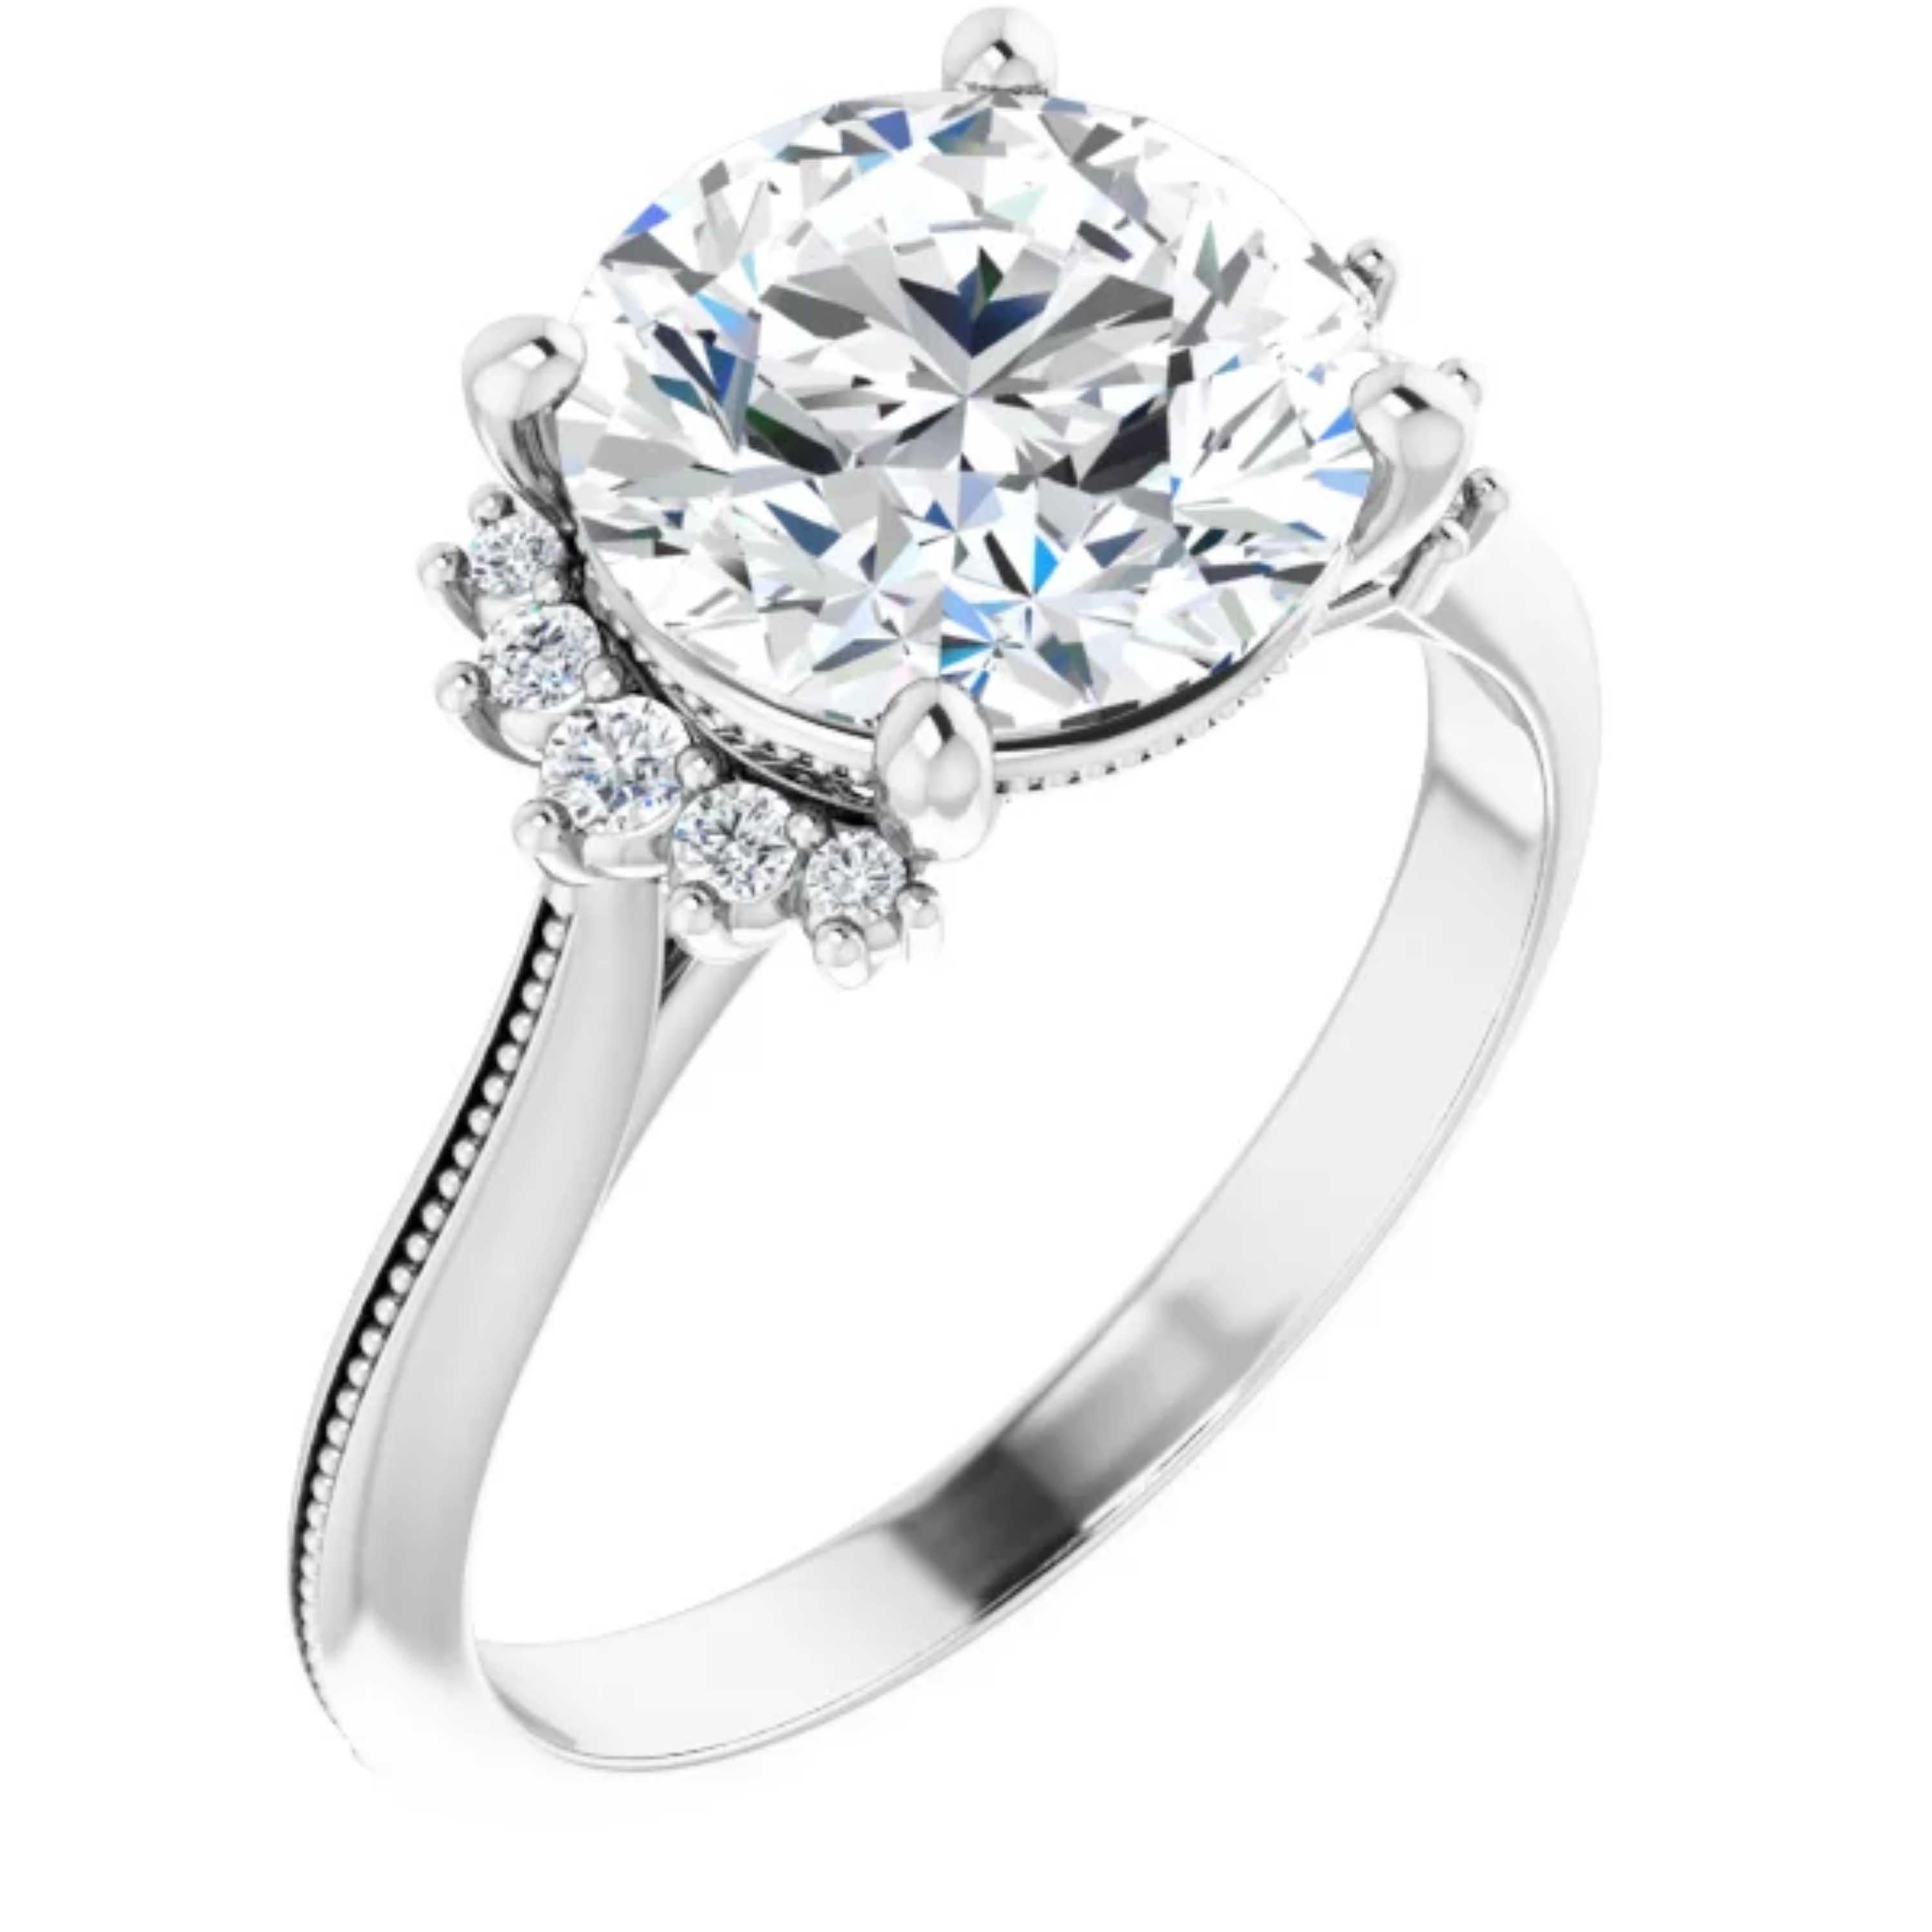 Intricate milgrain detailing adorns the shank of this vintage style engagement ring. Shimmering colorless diamonds surround the halo, making the center stone appear larger. Handcrafted meticulously in 18k white gold, this wedding ring set is a